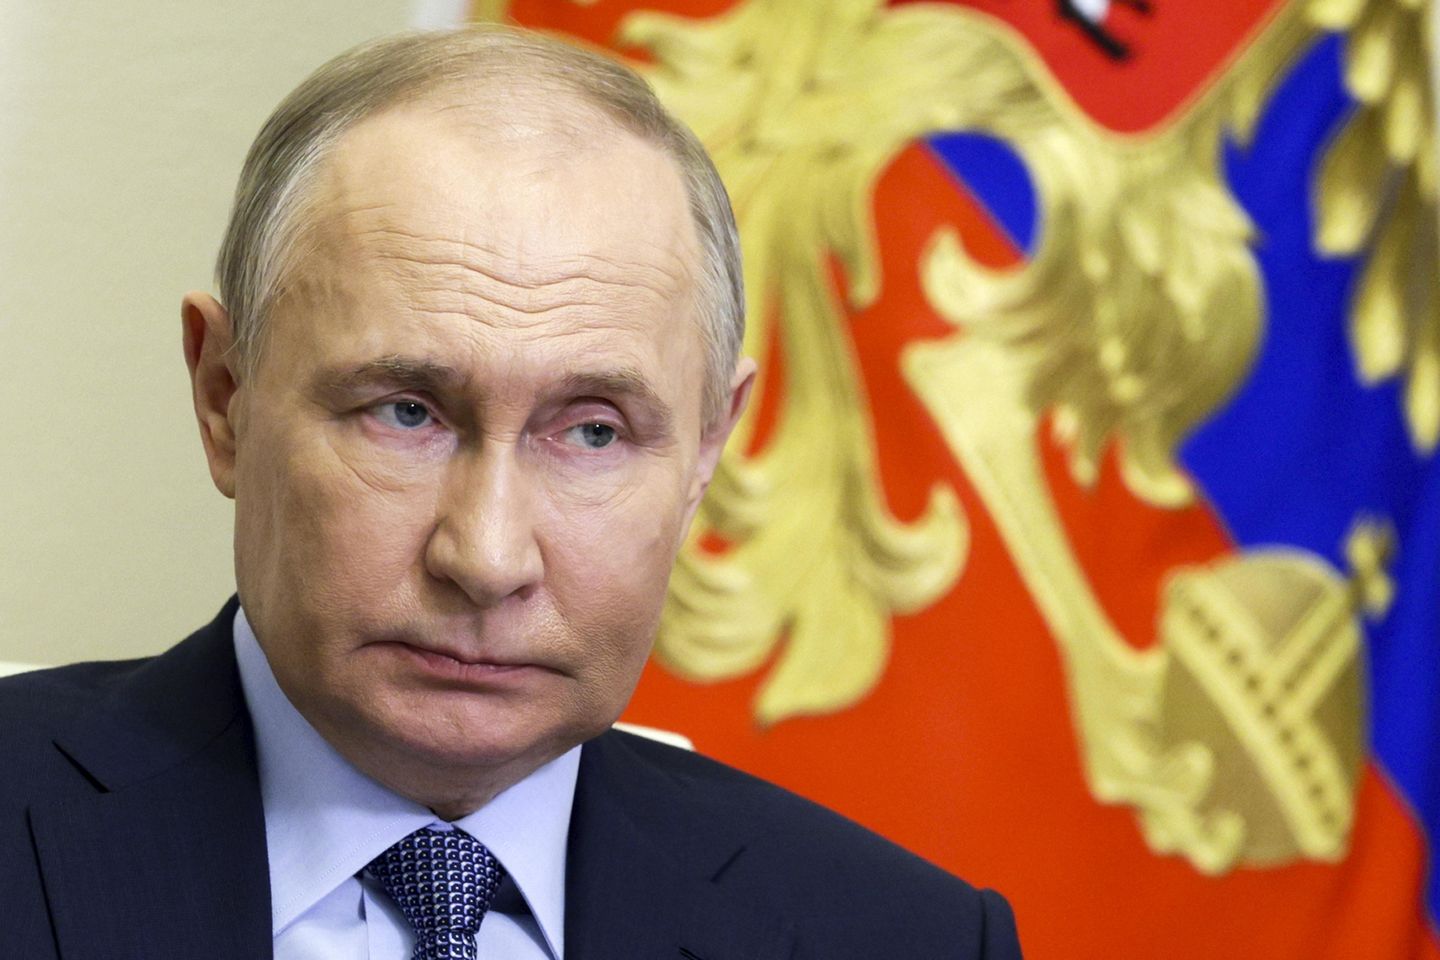 LISTEN: Are the threats from Russia, Iran and ISIS-K overblown?